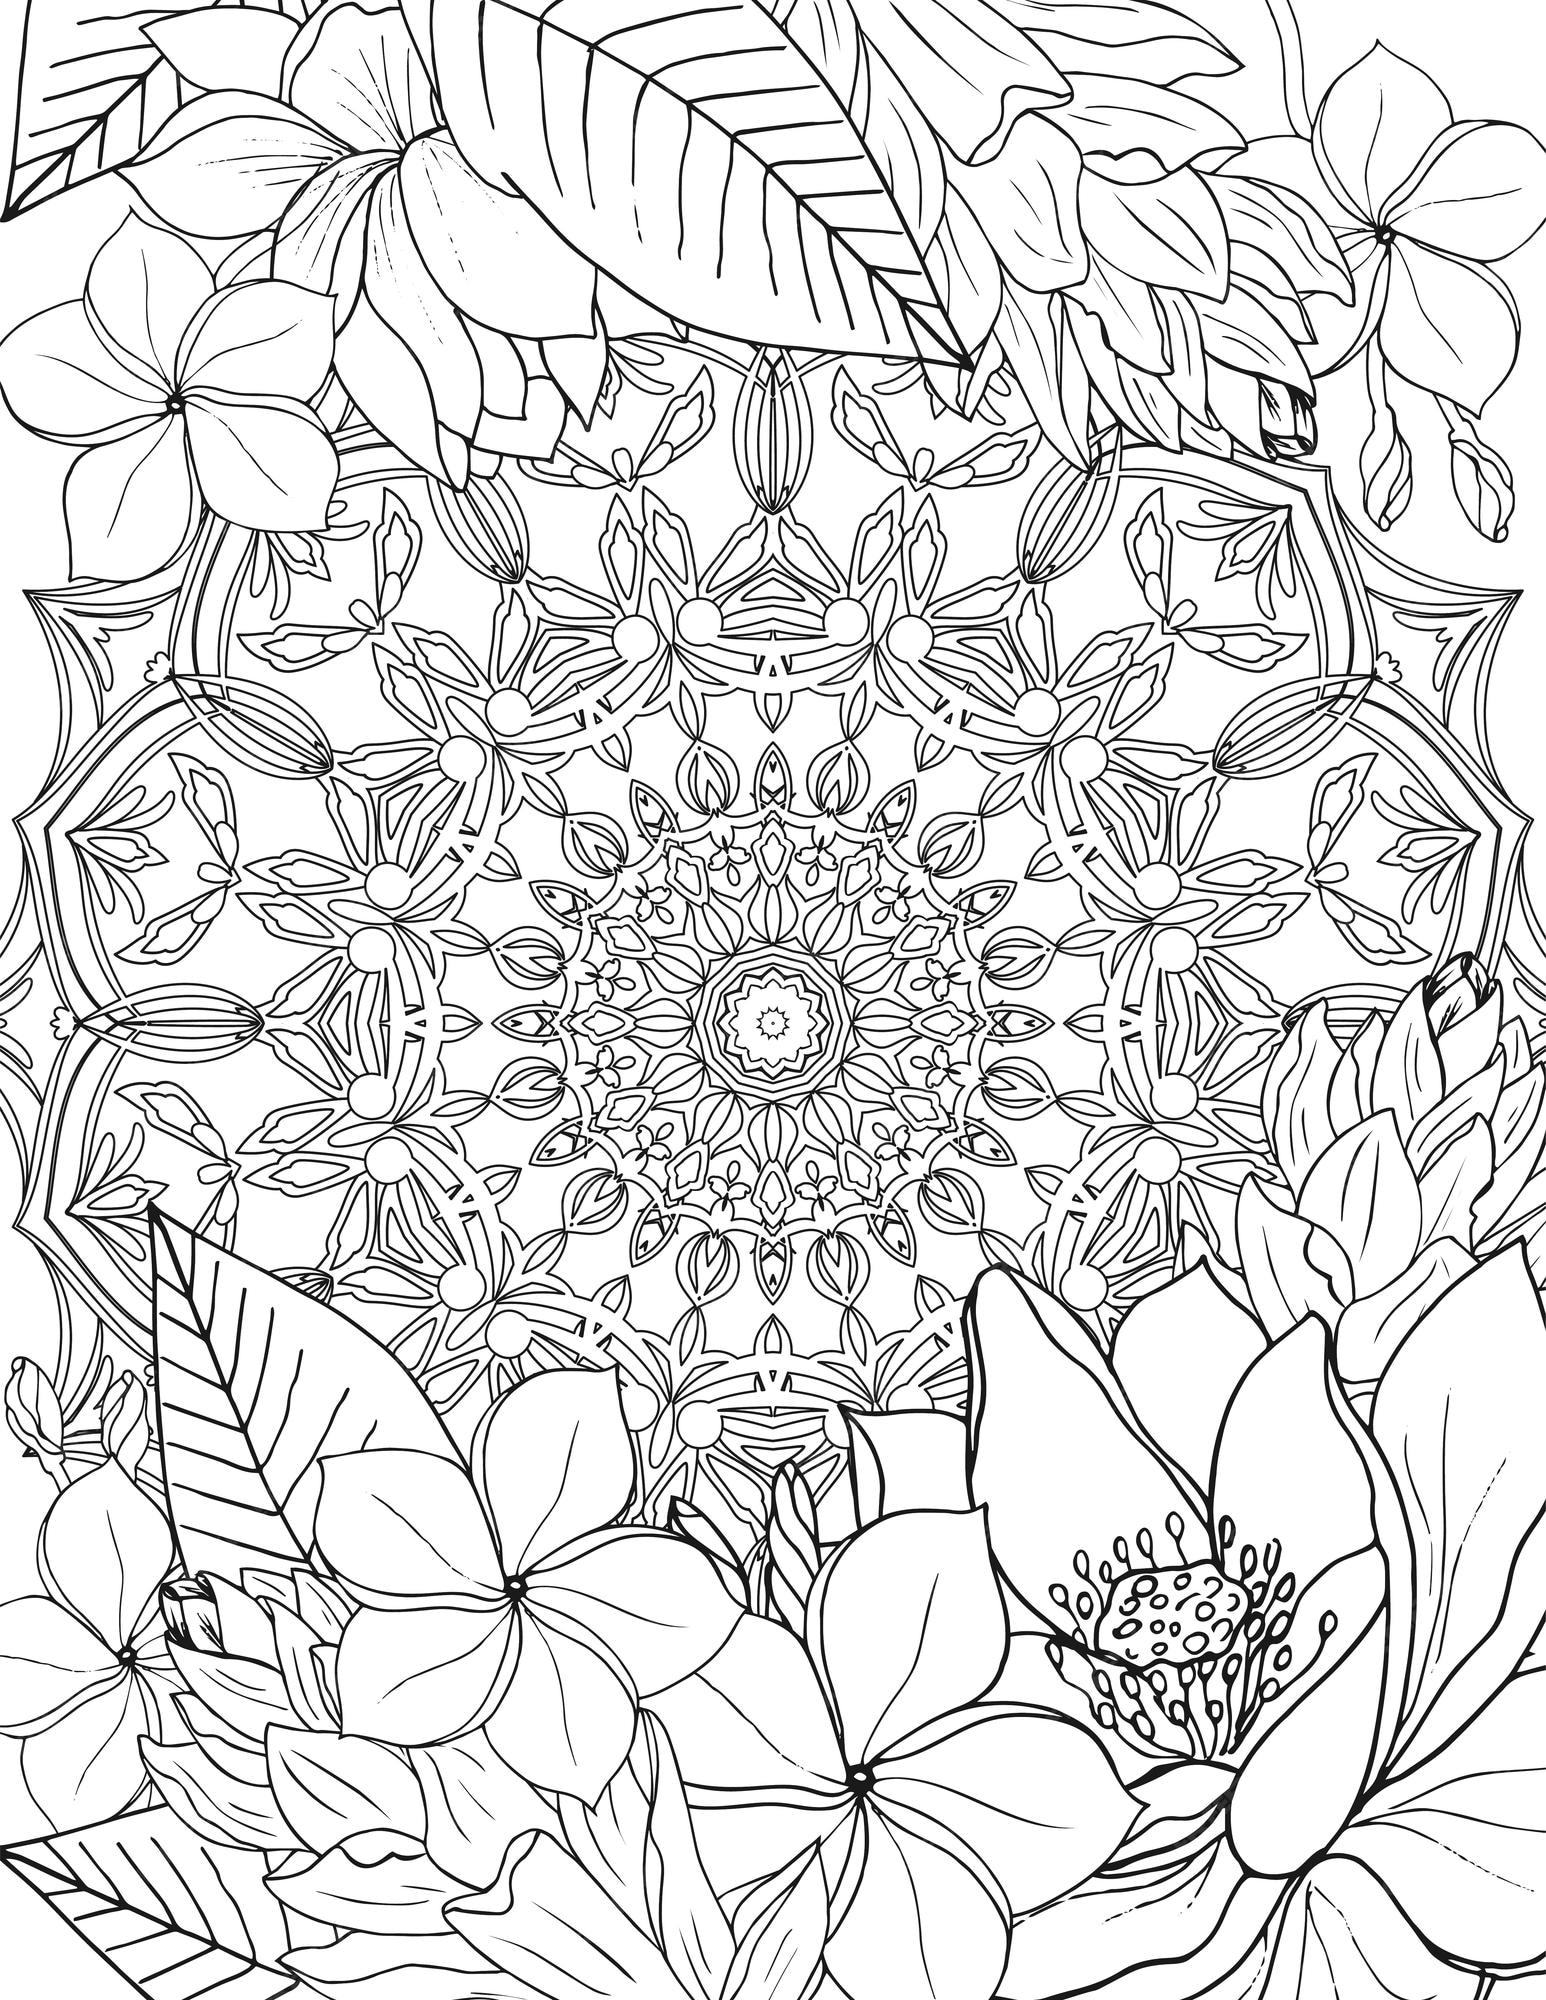 FREE Adult Coloring Pages: Download, Print, and Color